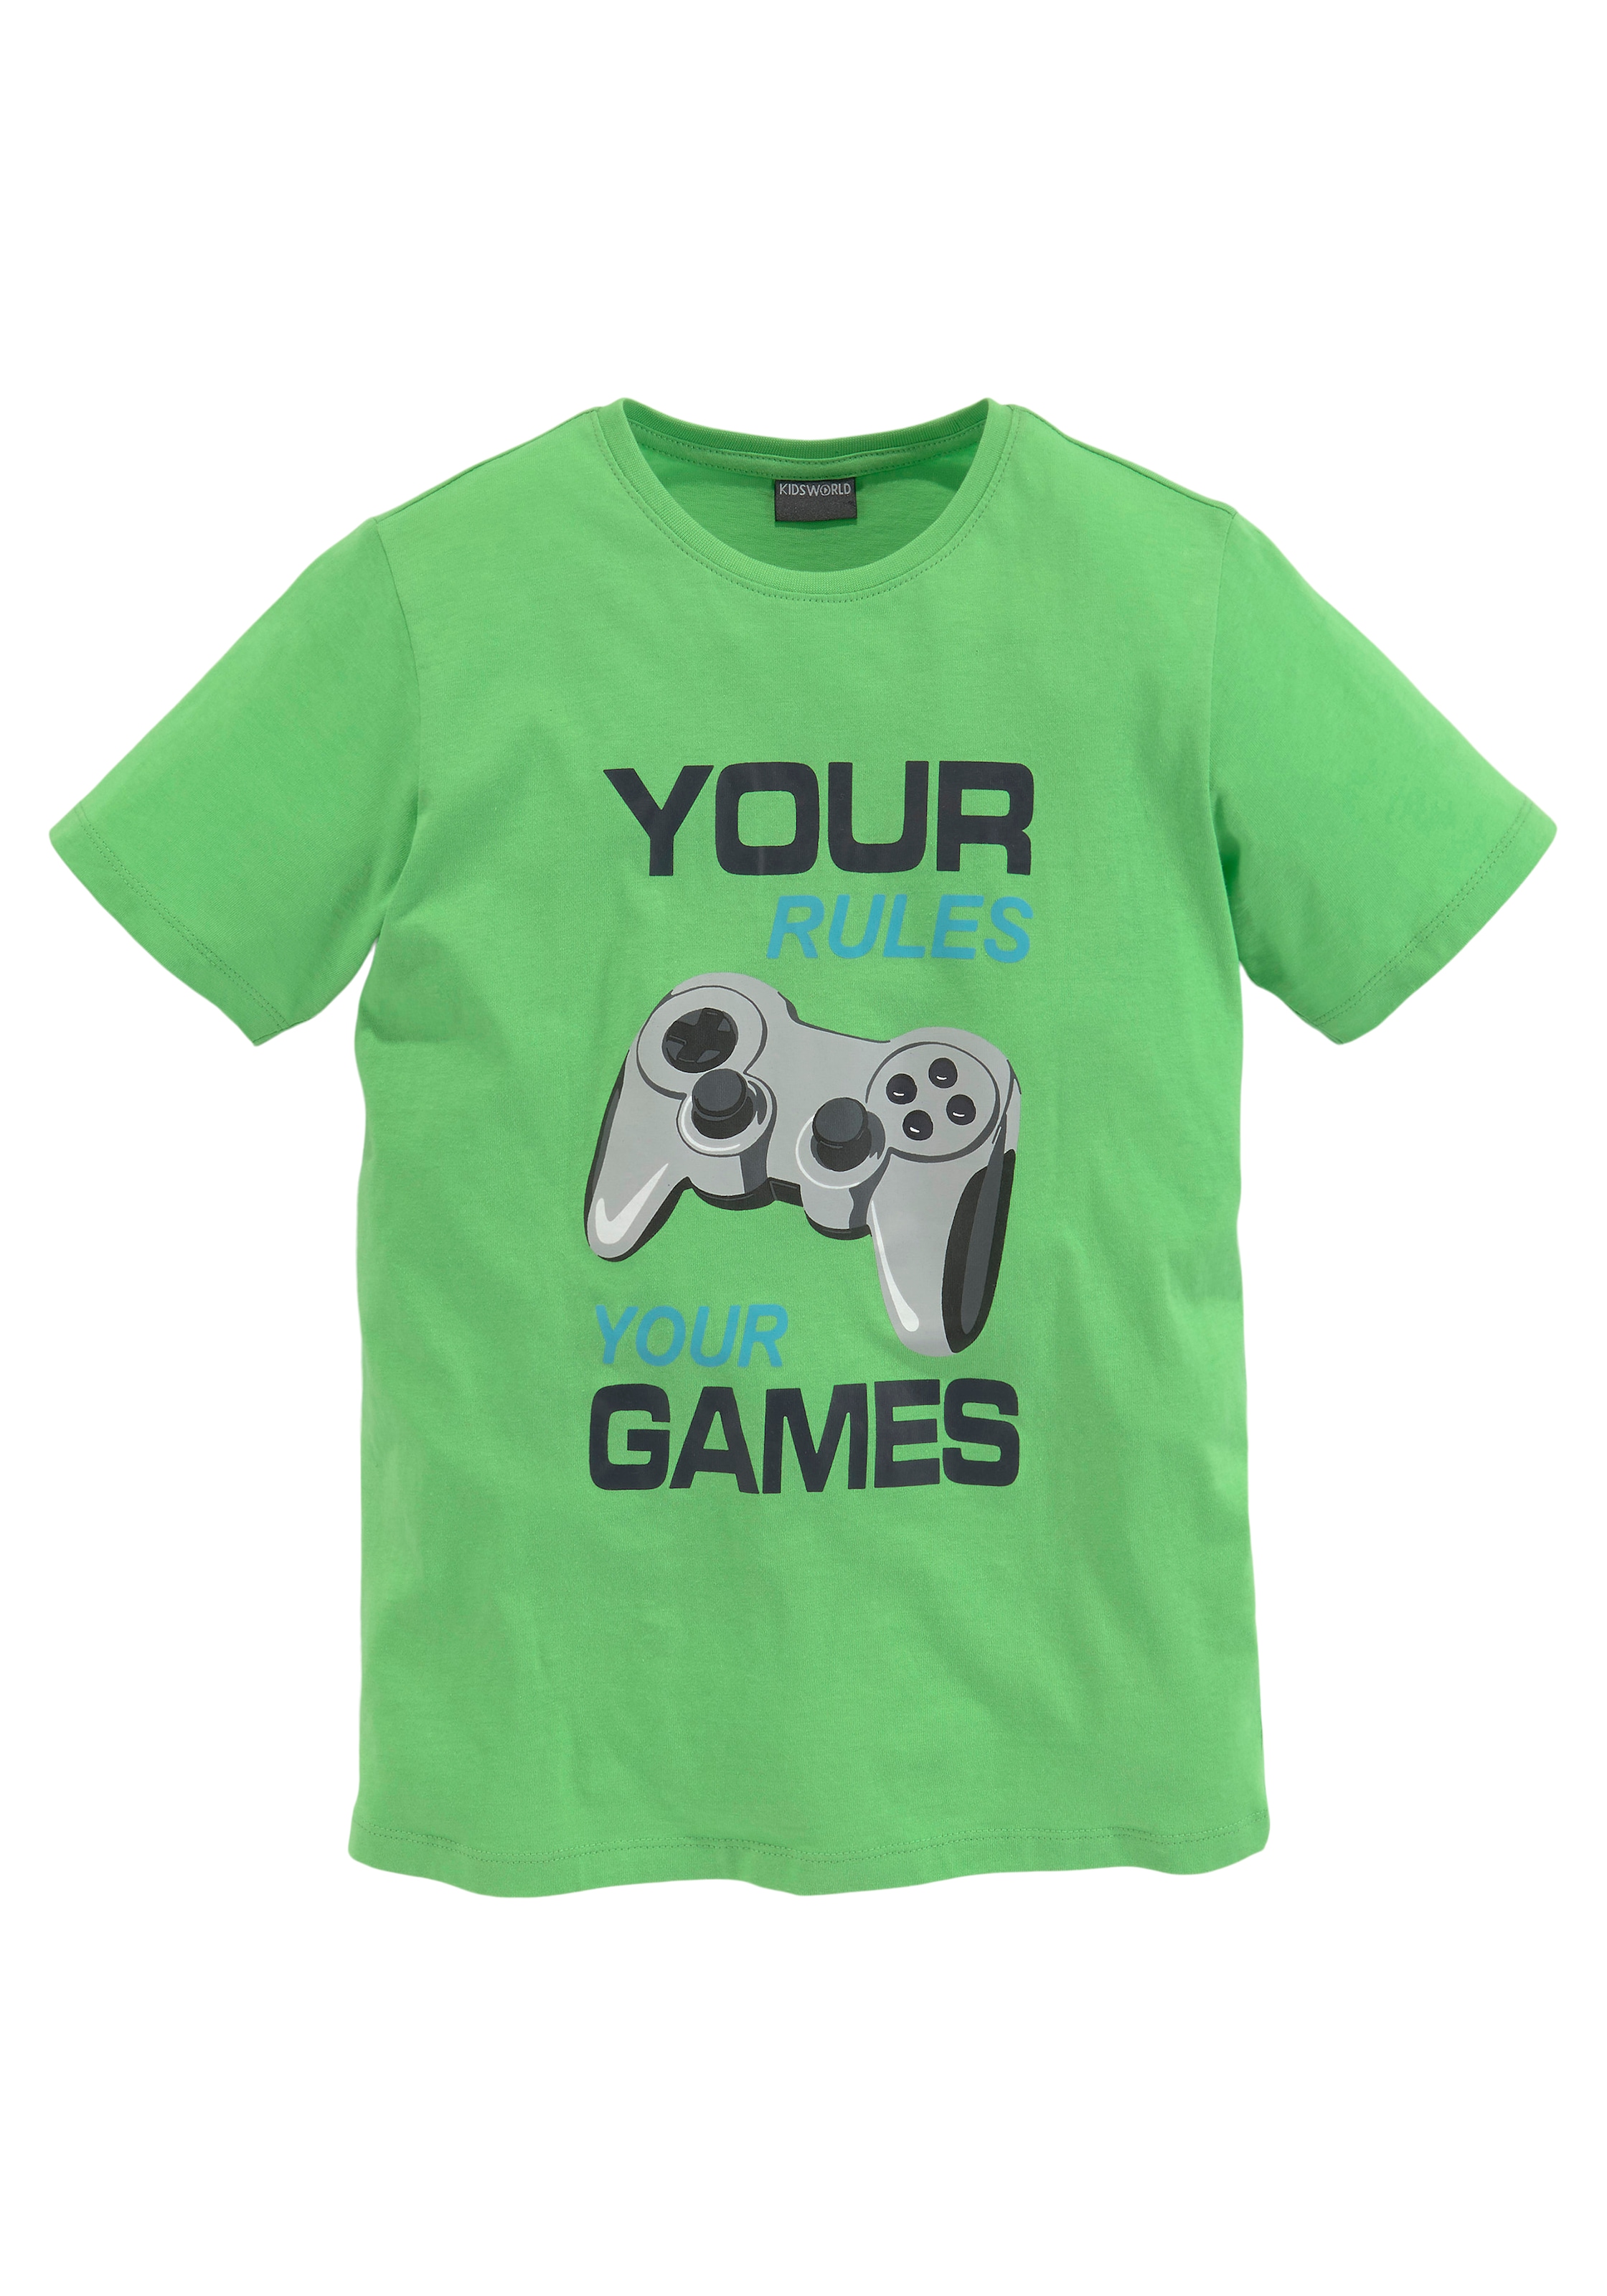 »YOUR bei GAMES« T-Shirt KIDSWORLD YOUR RULES